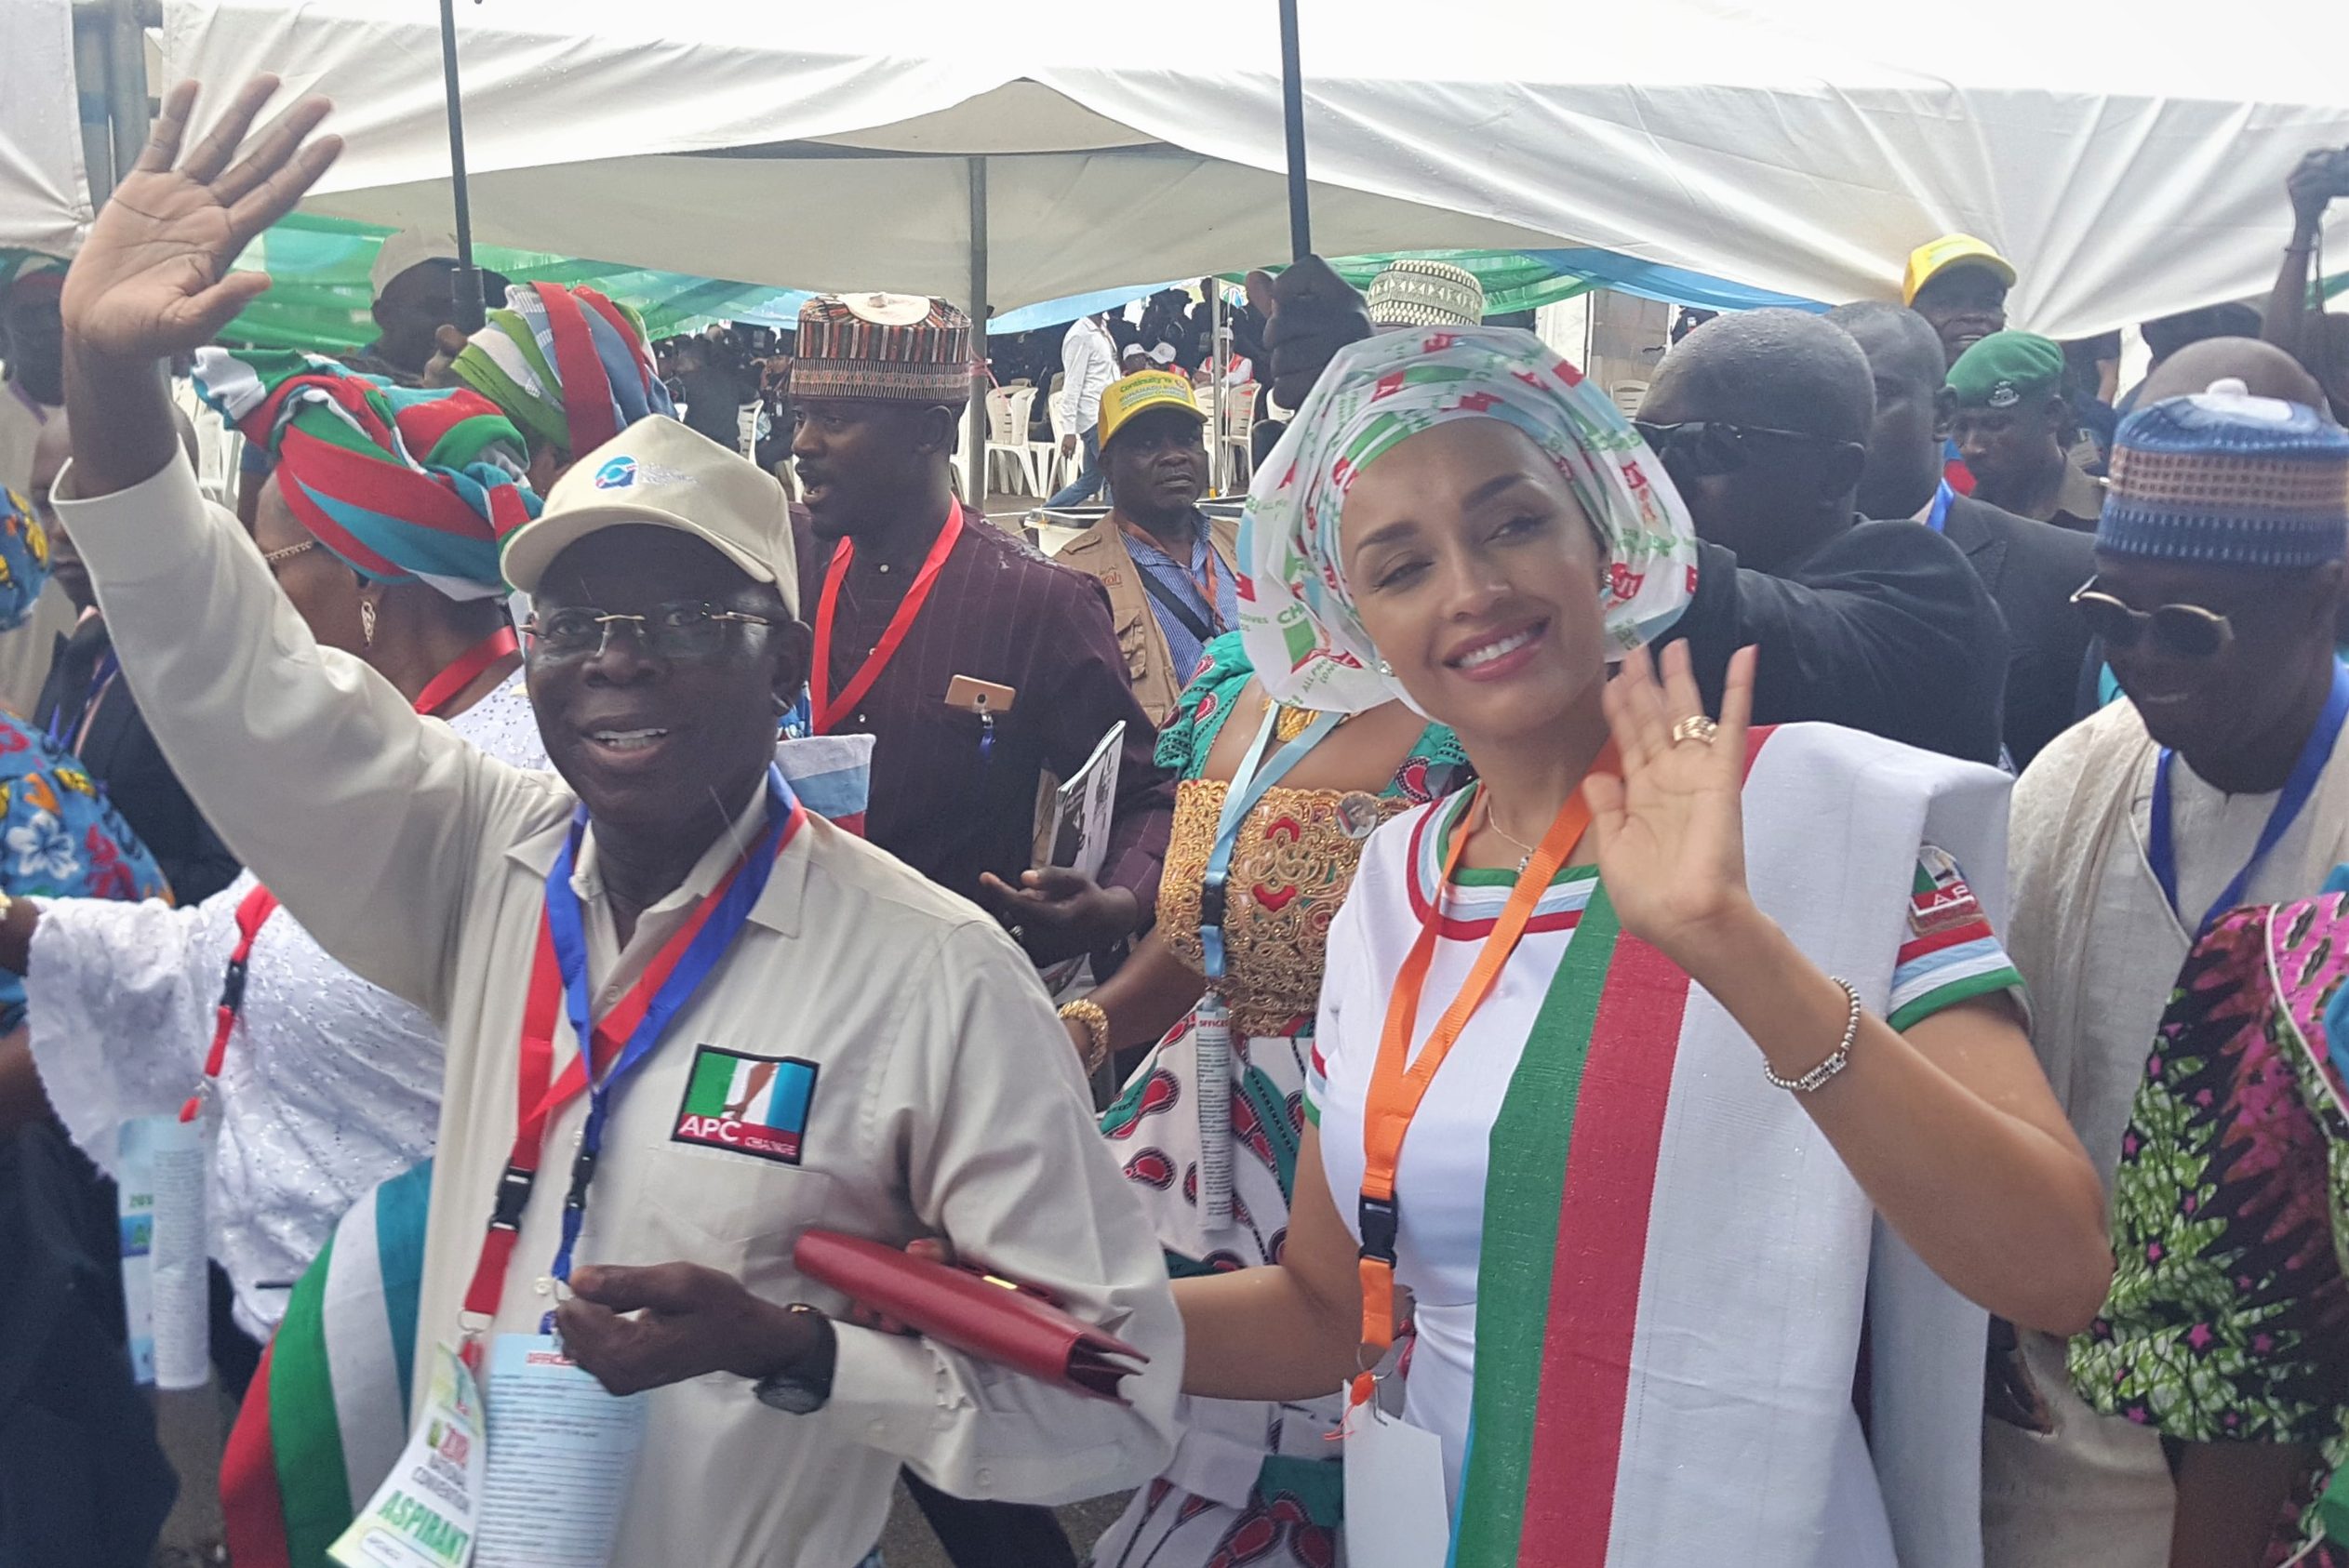 PHOTOS OF THE DAY: Buhari, Osinbajo, Oshiomhole and others at the APC national convention